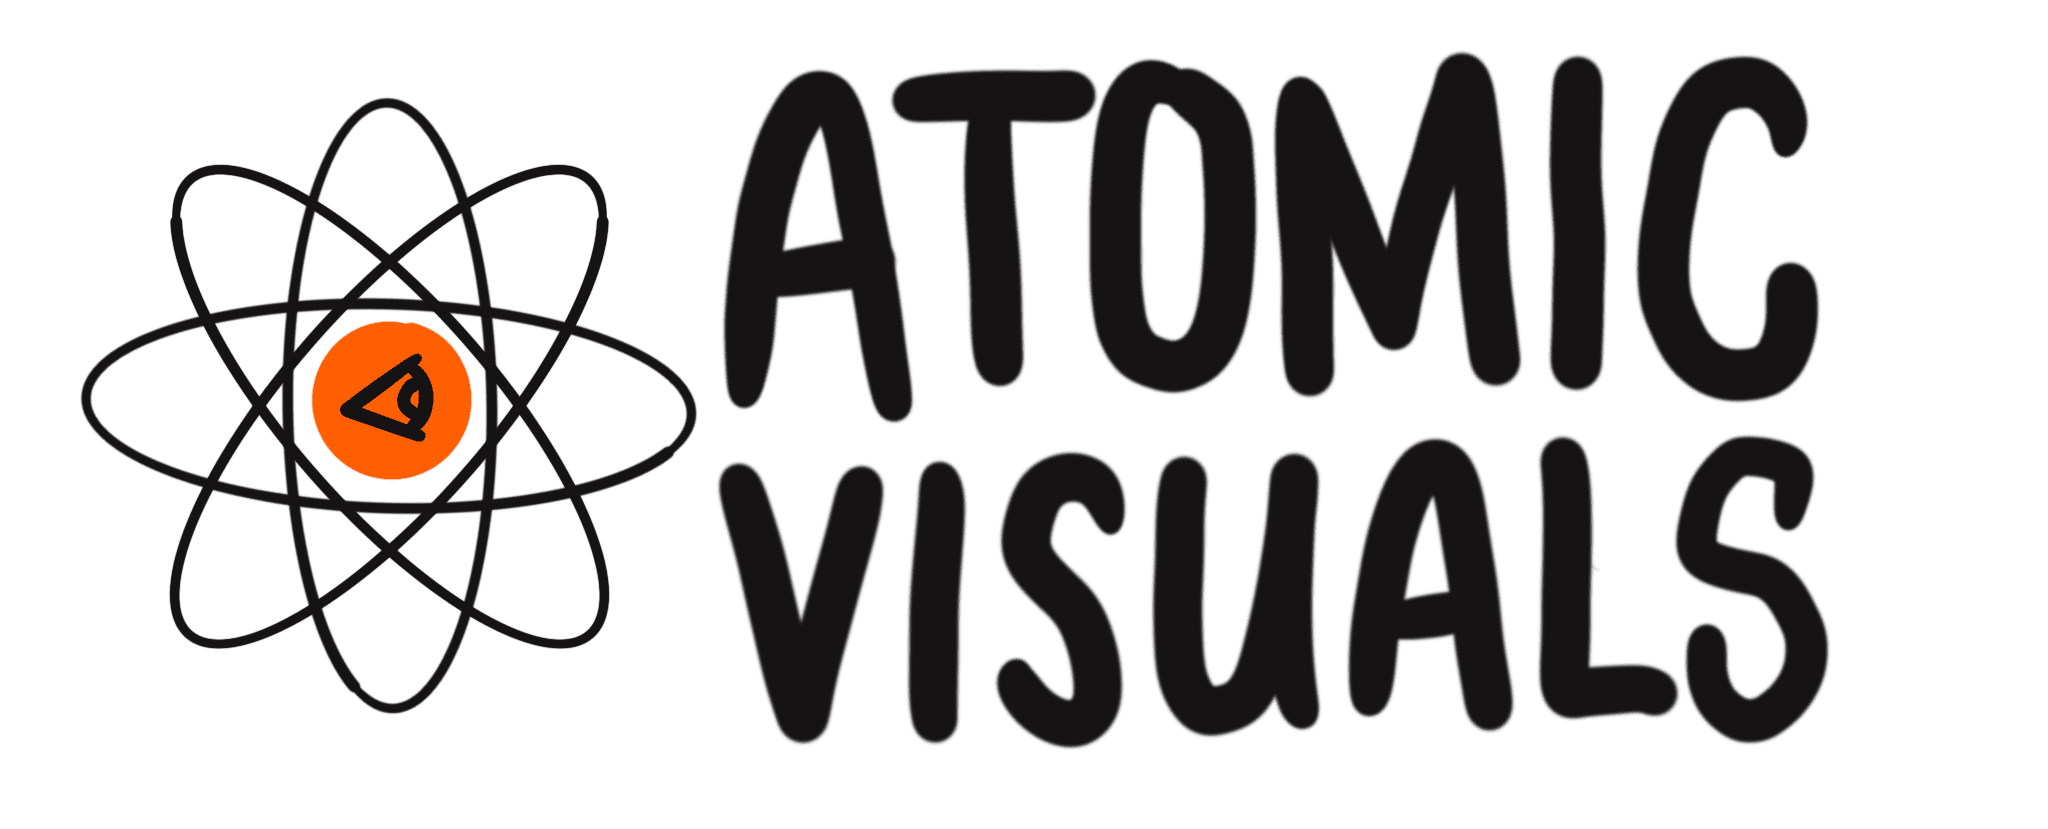 Atomic Visuals 101 Short Course By Laura Evans-Hill - Free Download